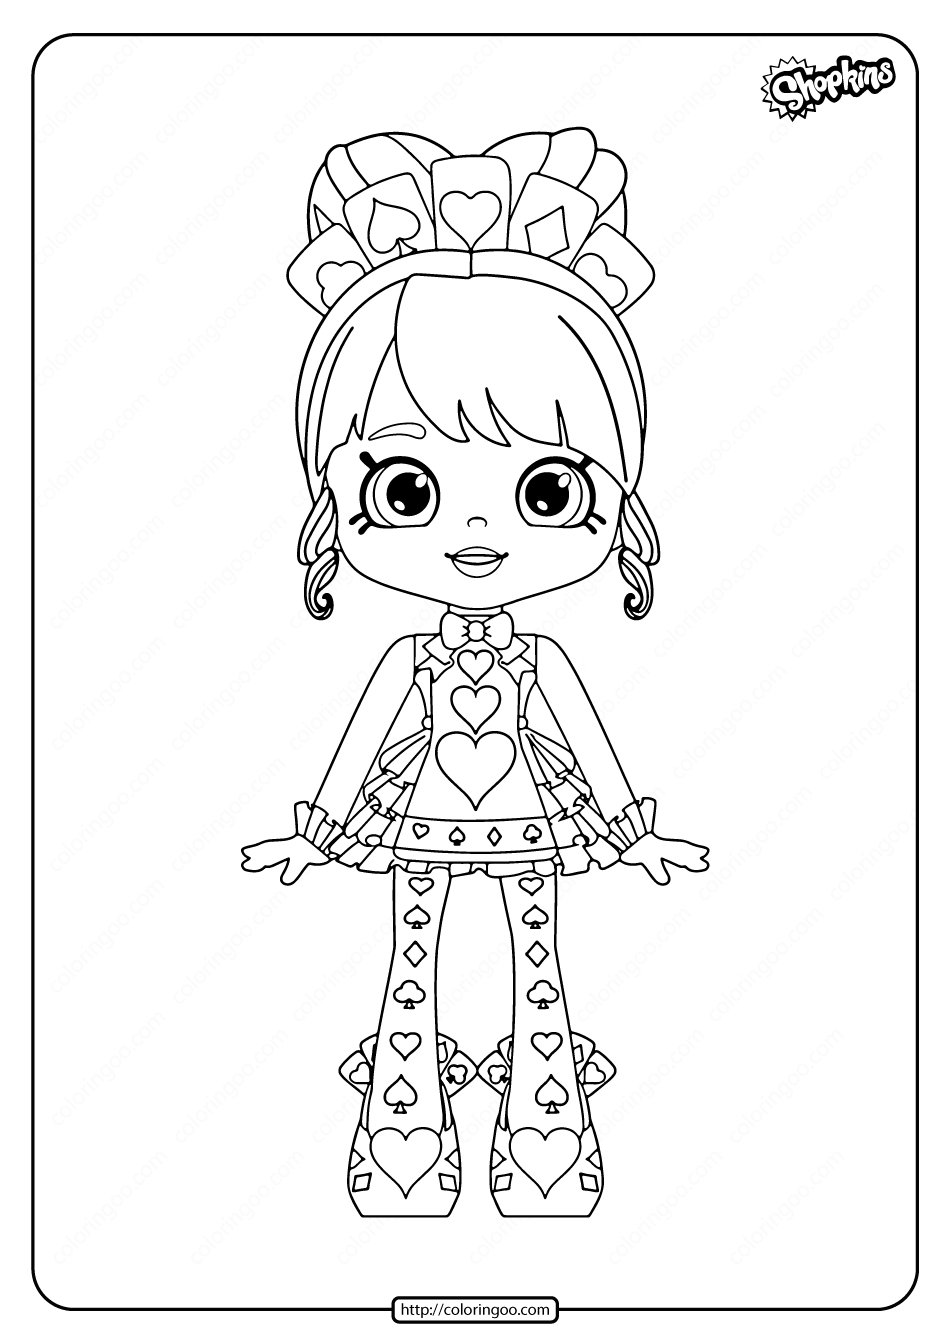 printable shopkins queenie hearts coloring pages